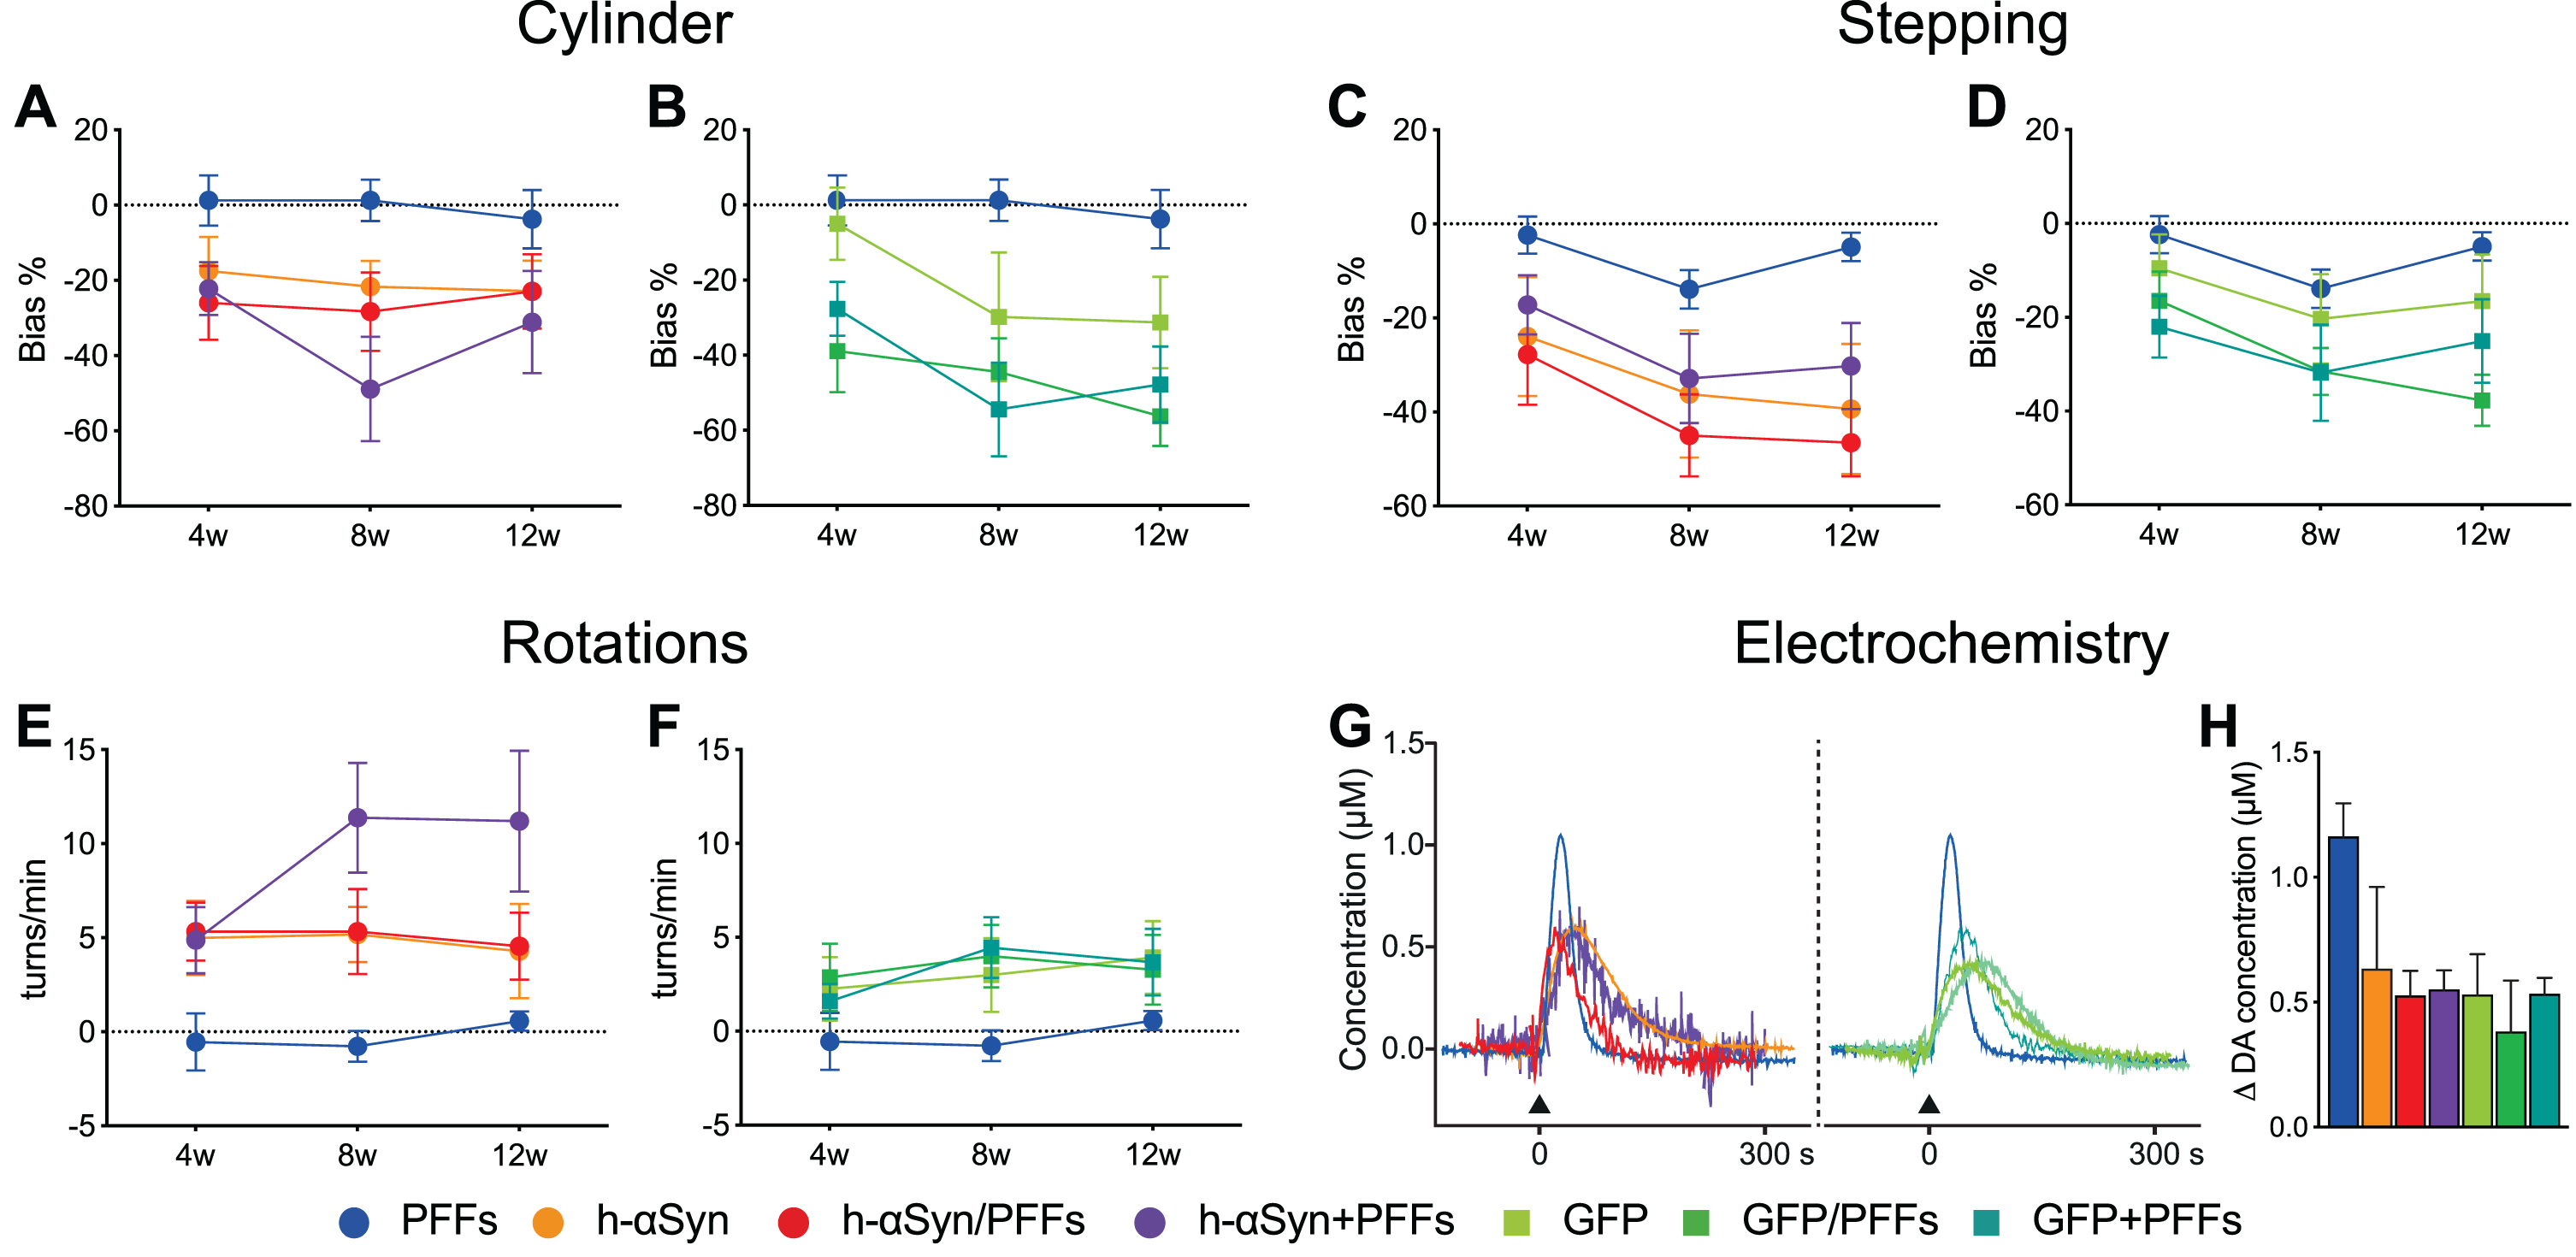 Behavioral impairments following h-αSyn and/or PFFs injection. A-F) Behavioral tests performed to assess motor function at 4-, 8-, and 12-weeks post-injection for Cylinder, Stepping, and Rotation test for the h-αSyn (circles, A, C, E), GFP (squares, B, D, F), and PFF (circles, A-F) injected groups, respectively. G) Electrochemical recordings (chronoamperometry) for KCl-evoked striatal DA release; black arrow indicates the timepoint of KCl application. H) Average peak amplitude, reflecting the maximum amount of dopamine available, for all the seven experimental groups. PFFs, preformed fibrils; h-αSyn, human alpha-synuclein; GFP, green fluorescent protein; w, weeks; s, seconds. Data are expressed as mean ± SEM. Note: the behavioral results of the PFFs group are duplicated in each graph for ease of comparison.